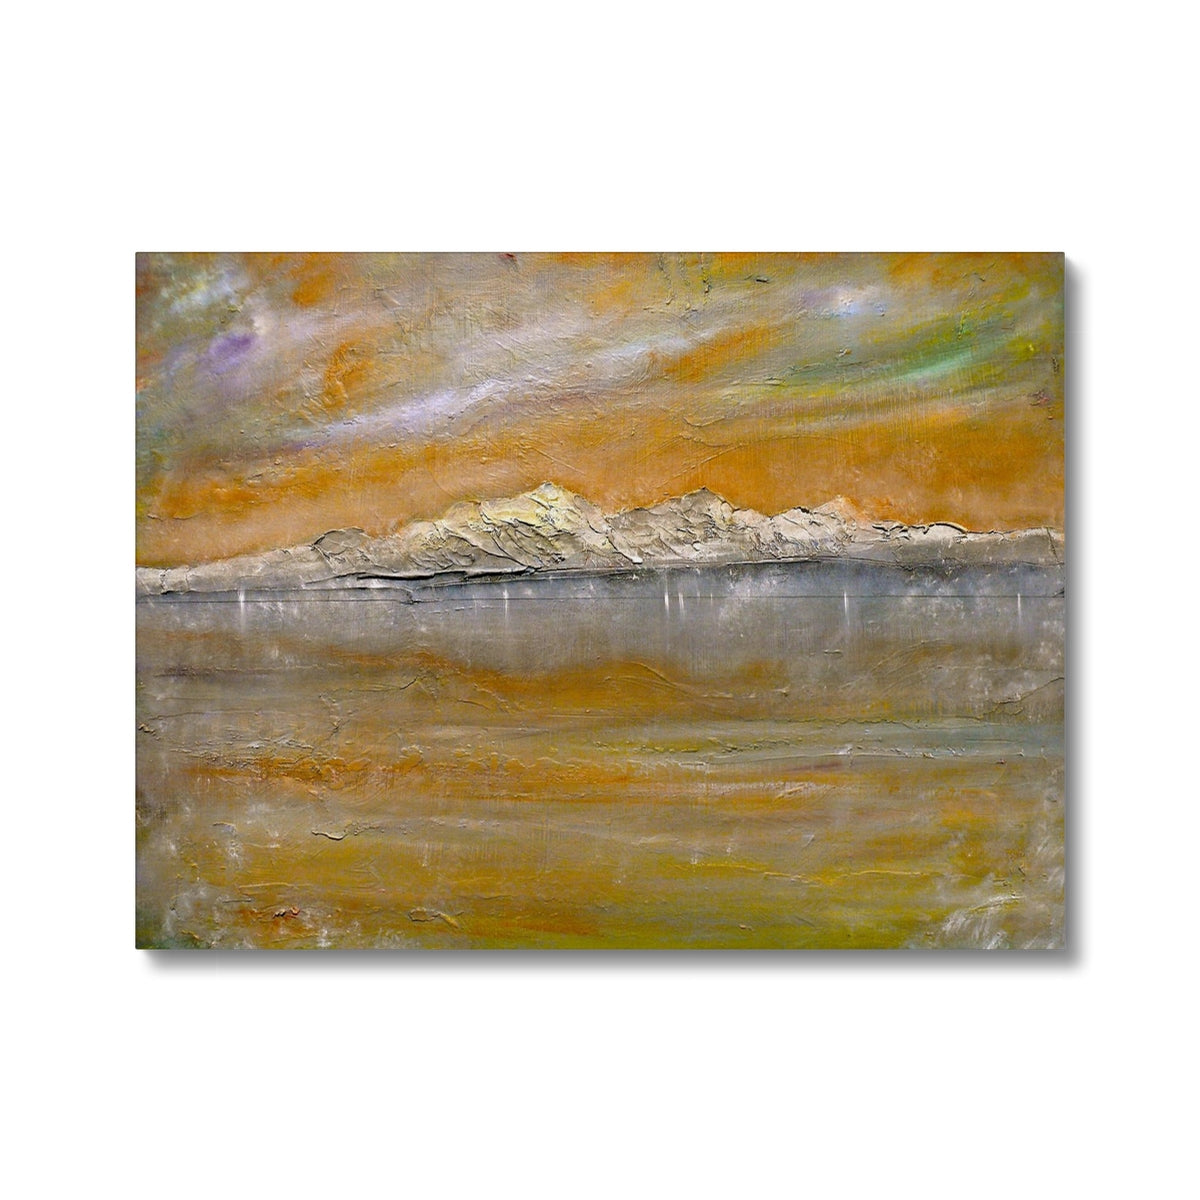 Arran Snow Painting | Canvas From Scotland-Contemporary Stretched Canvas Prints-Arran Art Gallery-24"x18"-Paintings, Prints, Homeware, Art Gifts From Scotland By Scottish Artist Kevin Hunter